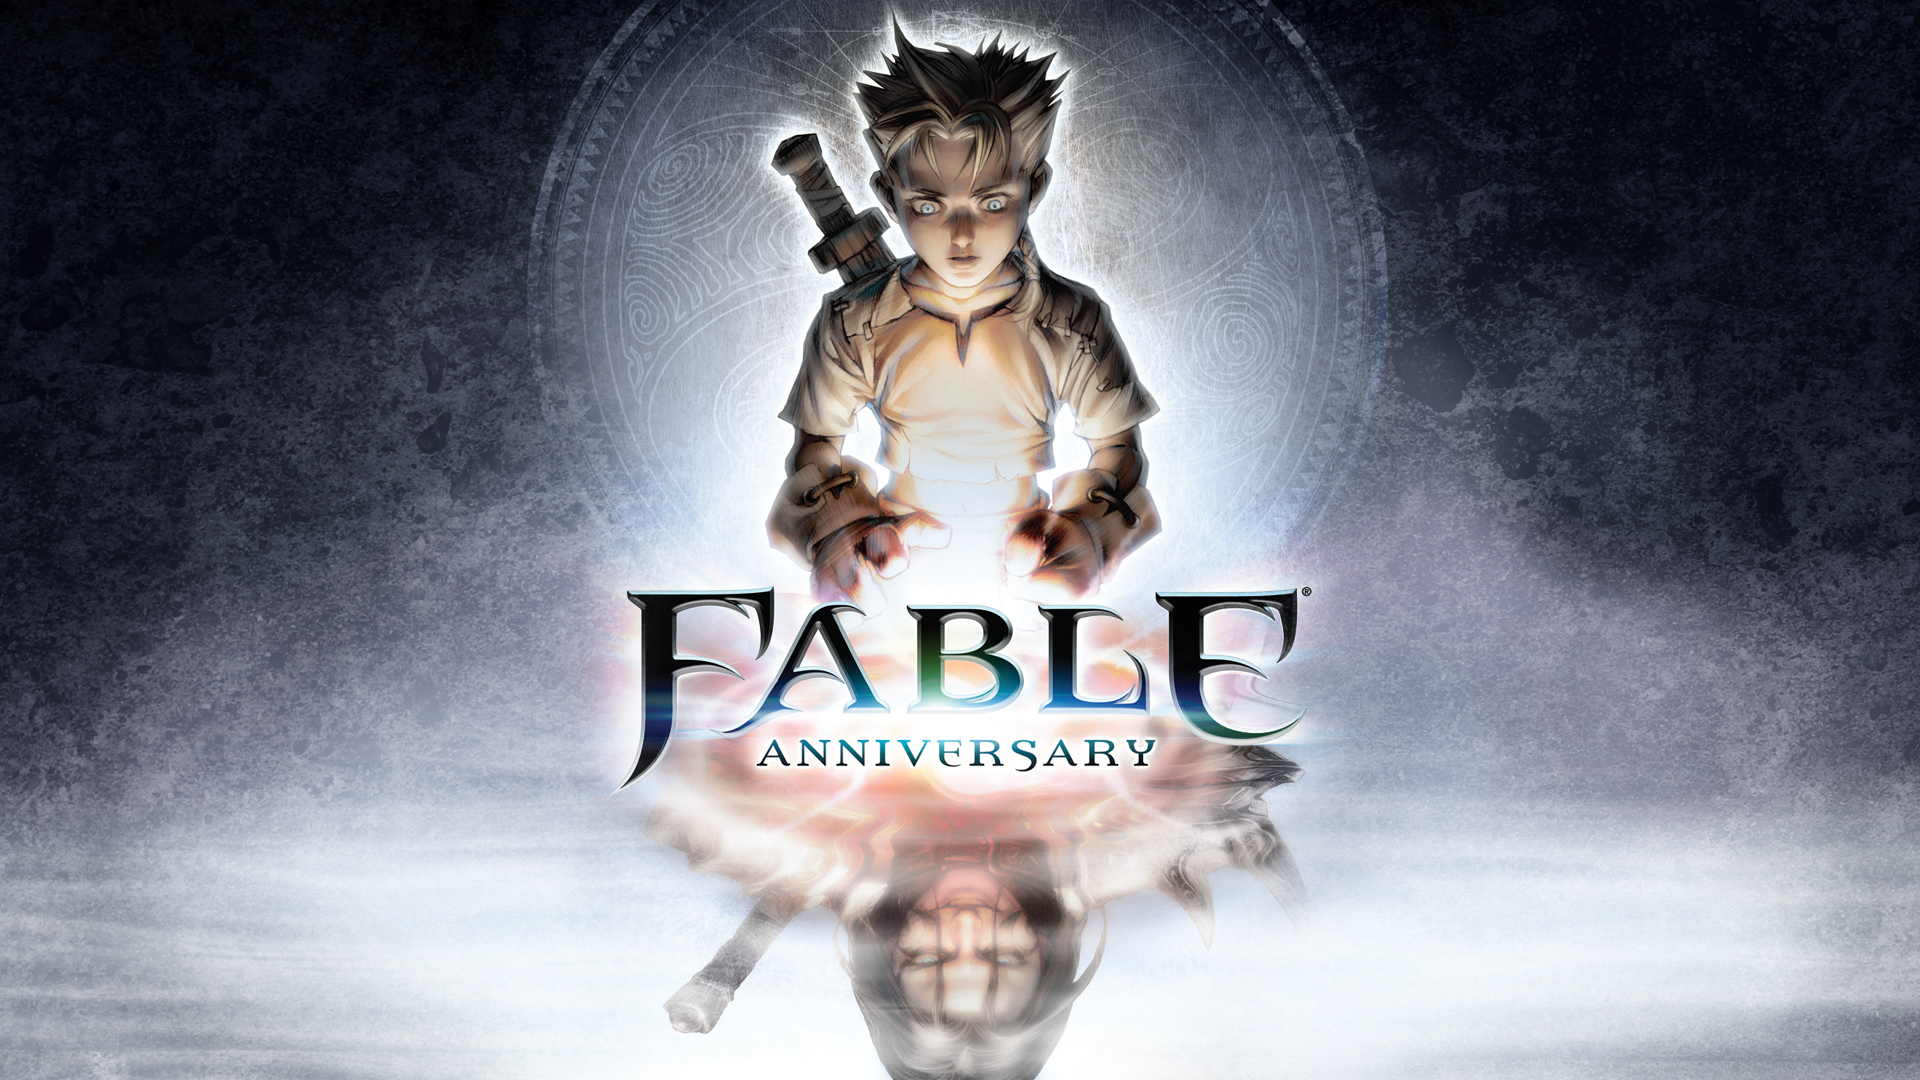 HQ Fable Wallpapers | File 3010.83Kb